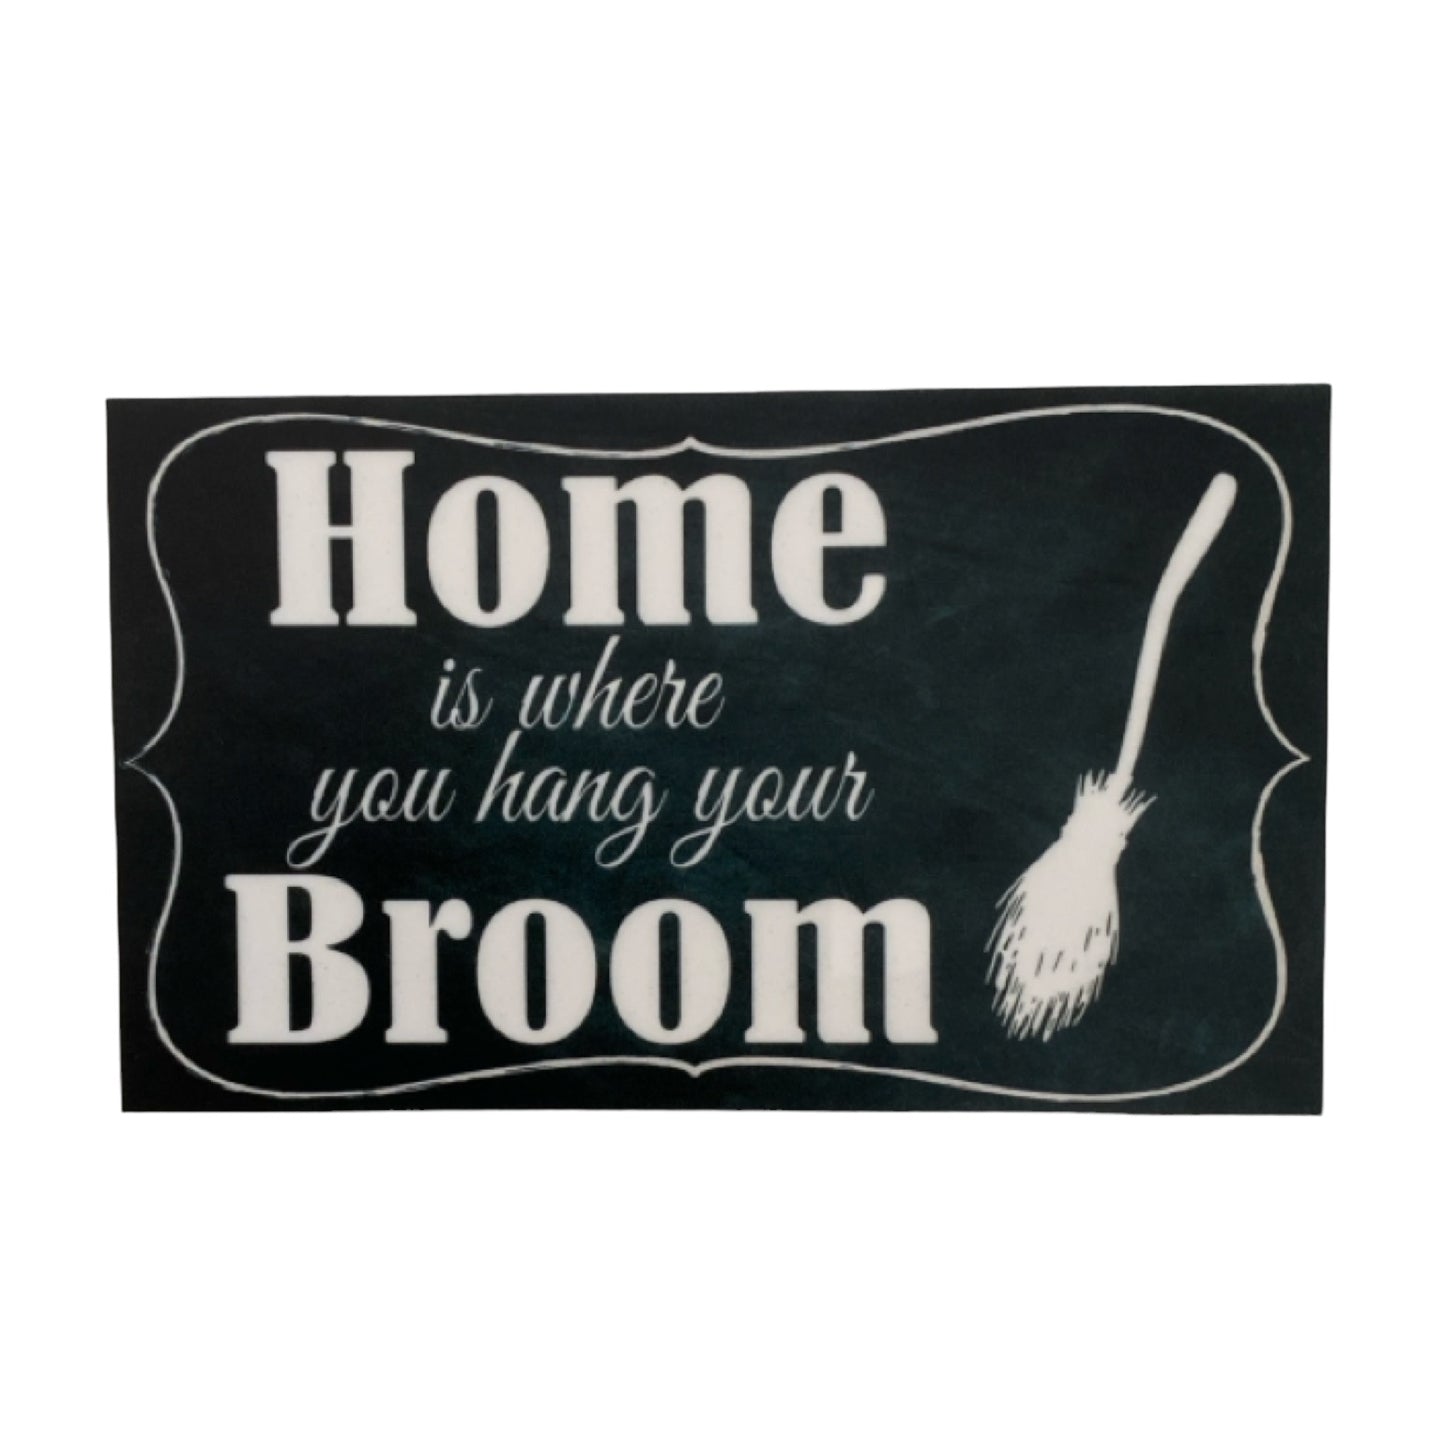 Home Where You Hang Your Broom Vintage Witch Sign - The Renmy Store Homewares & Gifts 